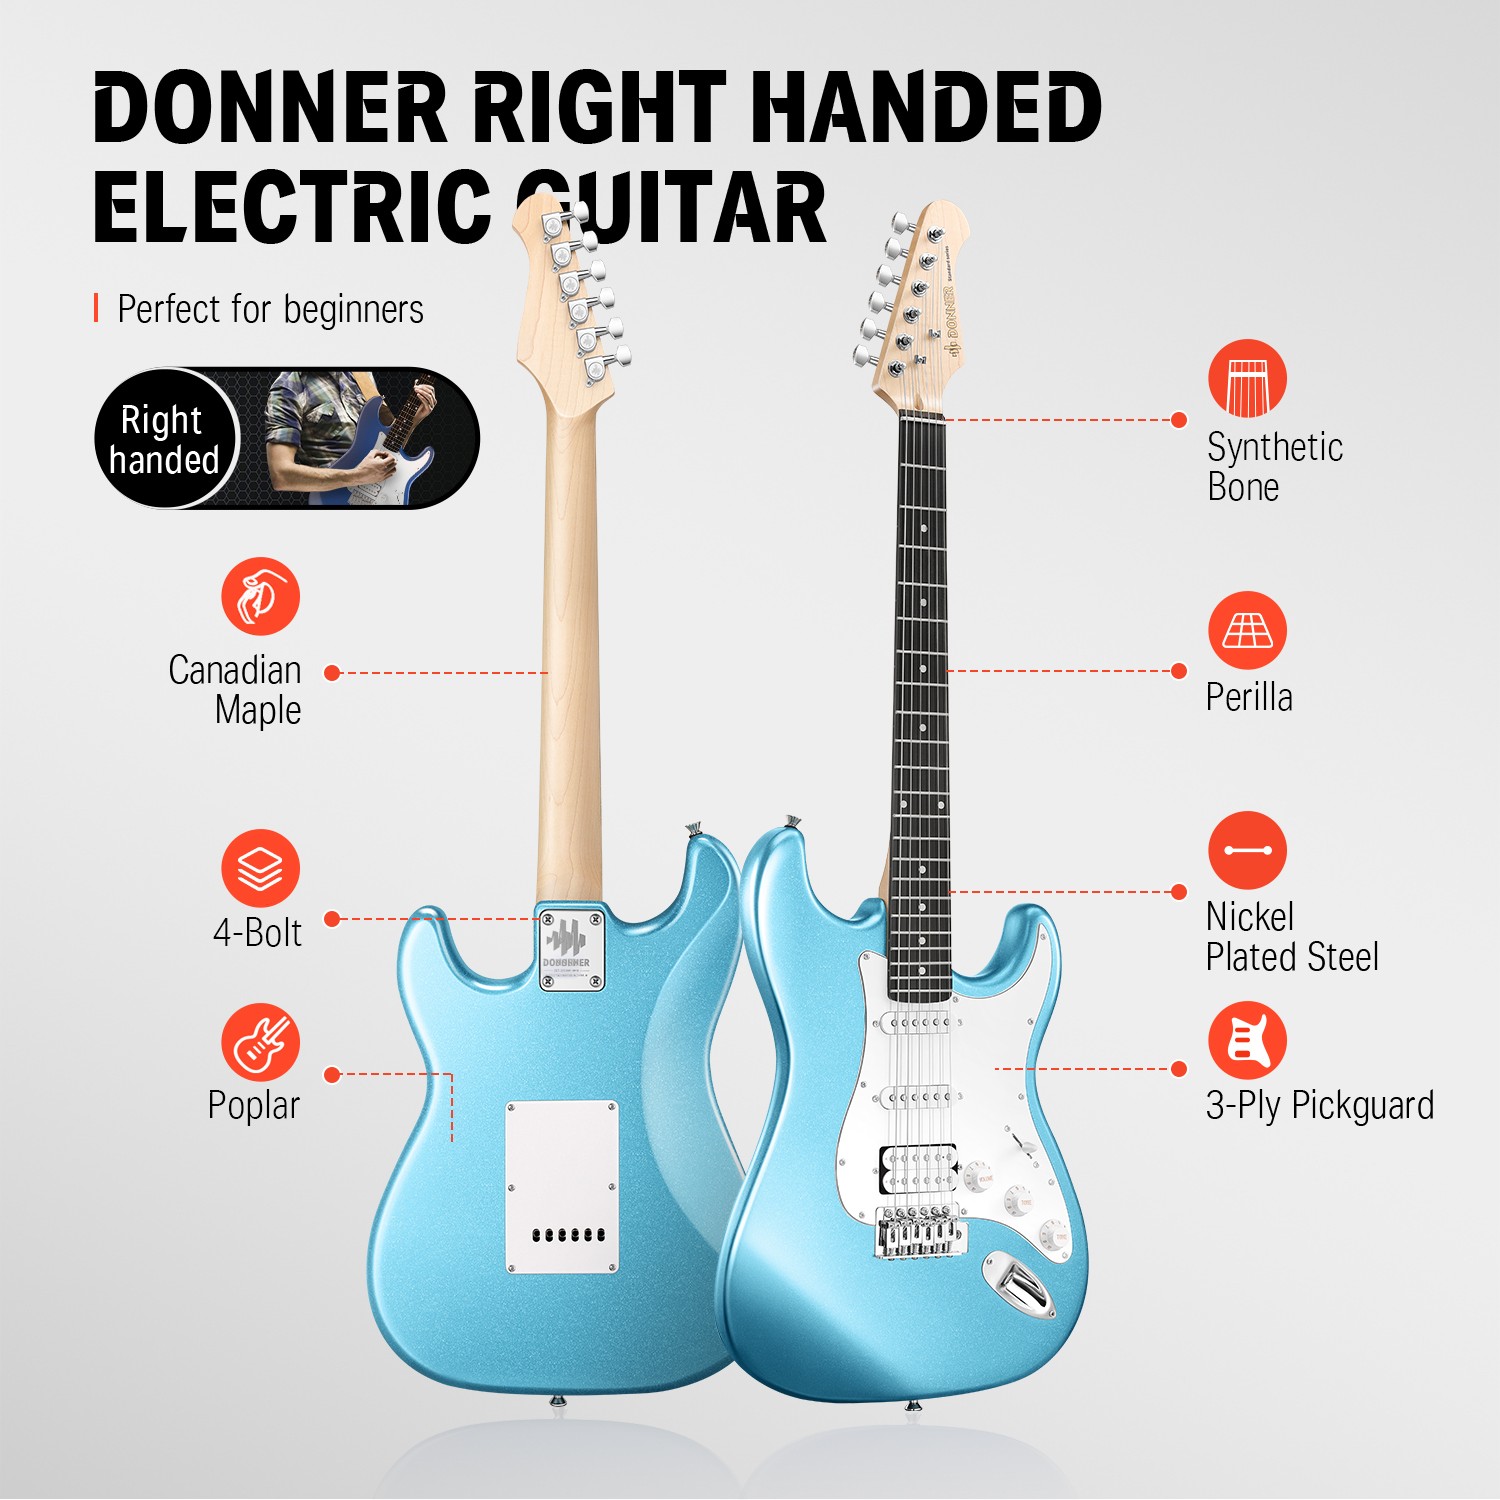 Donner DST-100R Solid Body 39 Inch Full Size Electric Guitar Kit , Beginner Starter, with Amplifier, Bag, Capo, Strap, String, Tuner, Cable, Picks - image 3 of 6